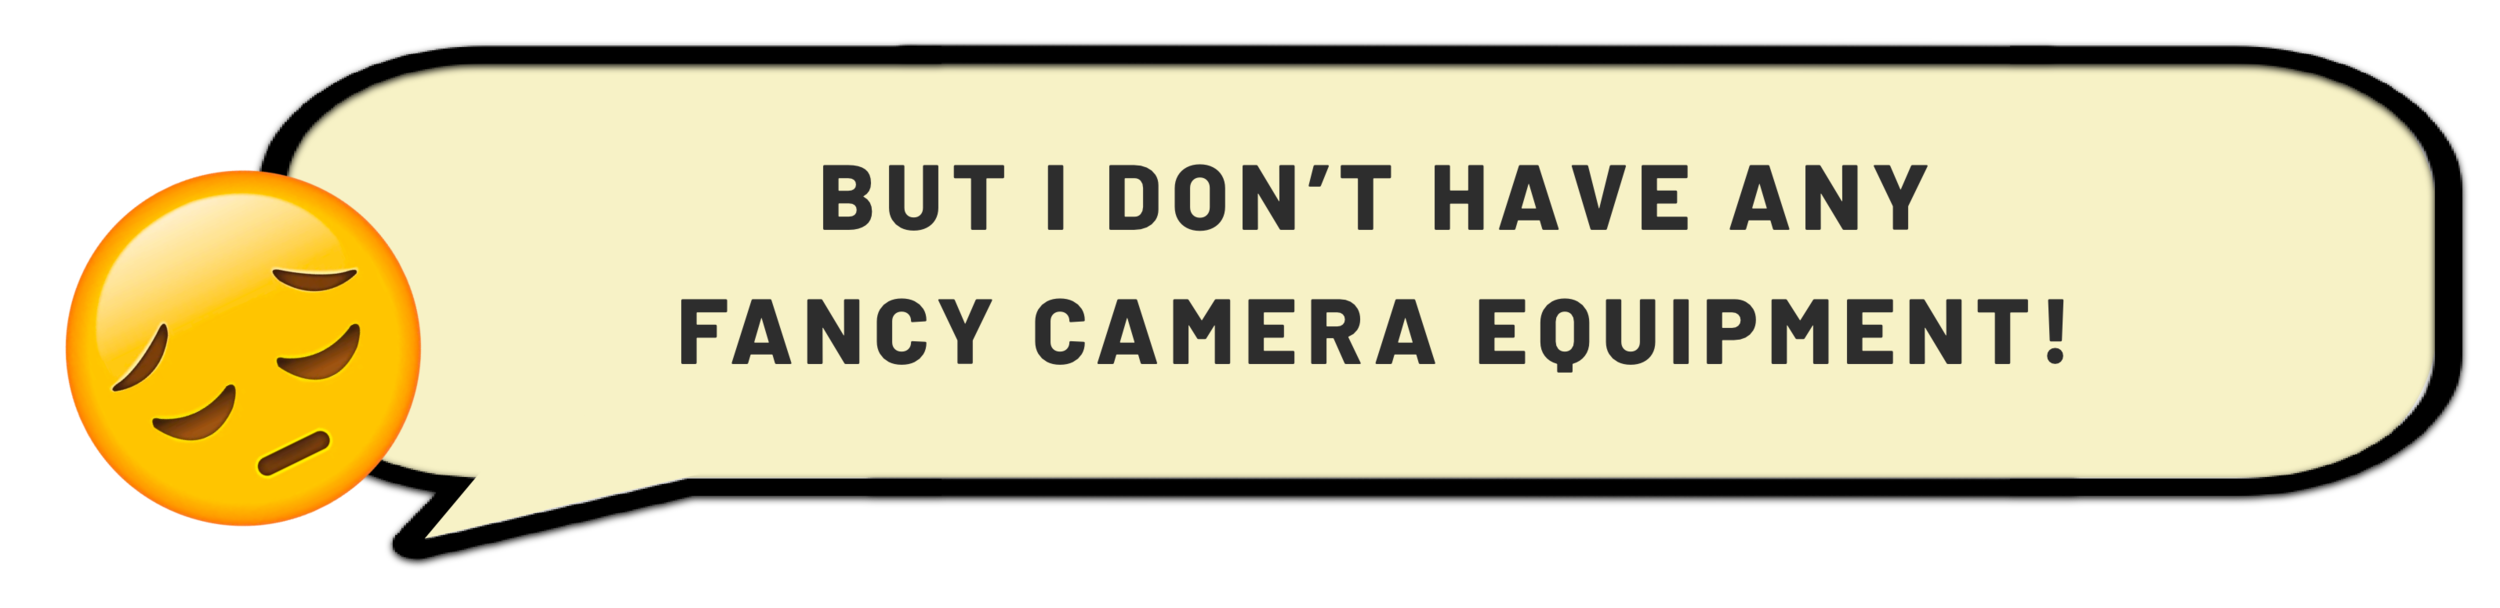 BUT I DON’T HAVE ANY FANCY CAMERA EQUIPMENT.png